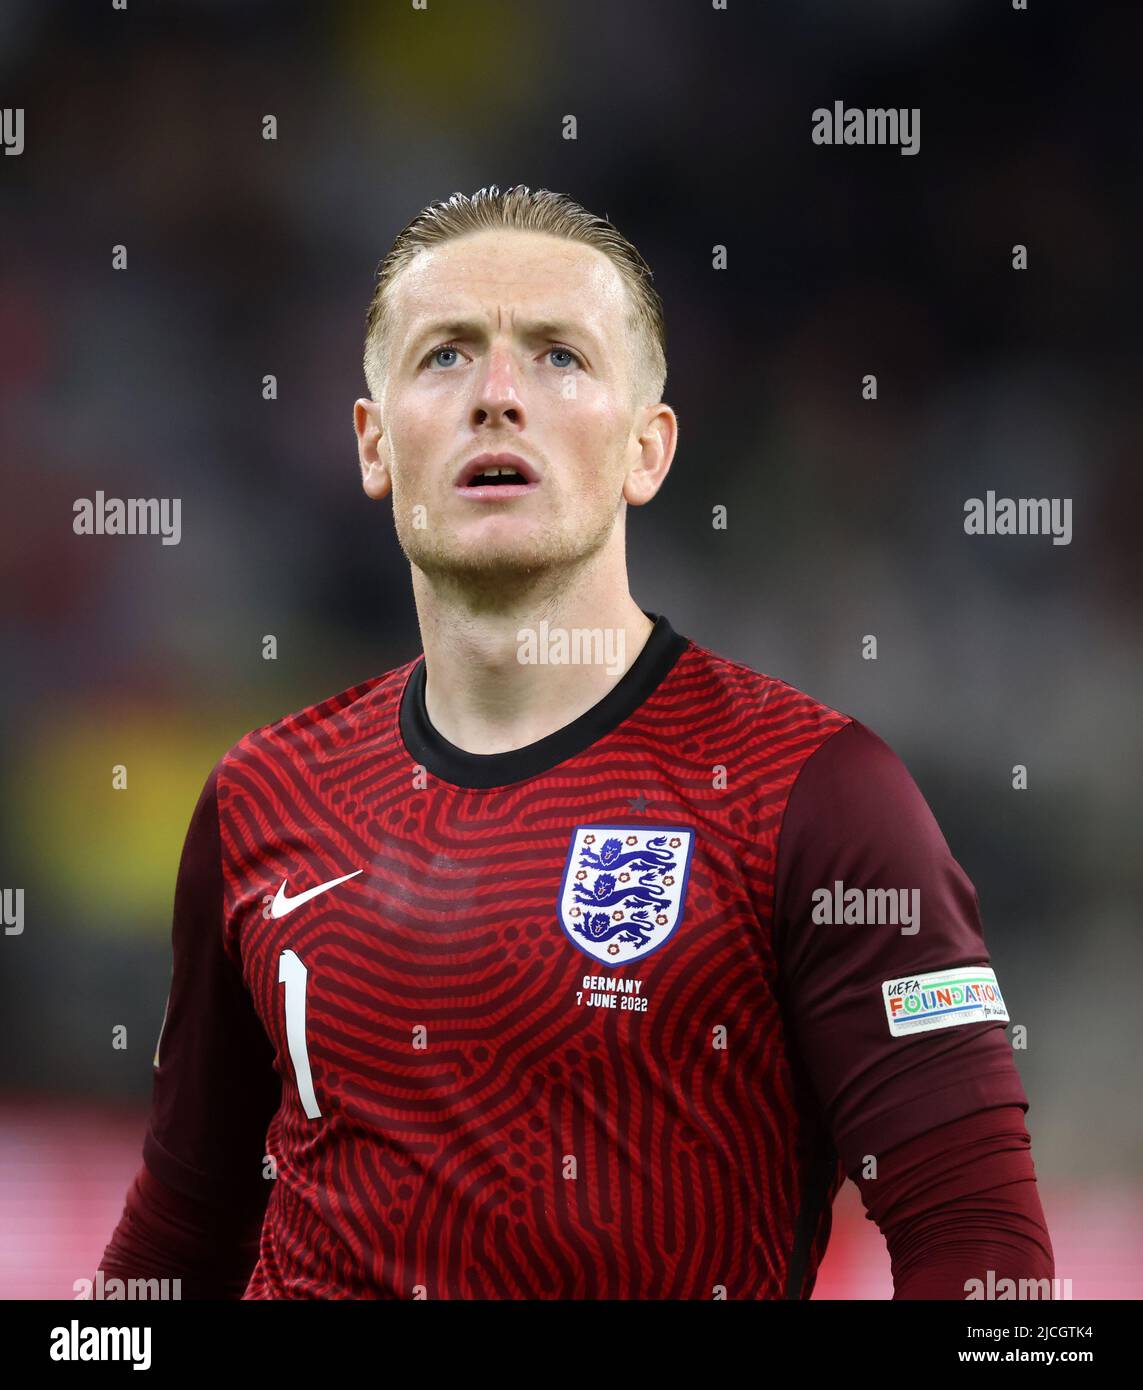 Jordan Pickford of England MUNICH, GERMANY - JUNE 07:  UEFA Nations League League A Group 3 match between Germany and England at Allianz Arena on June 07, 2022 in Munich, Germany. Nations League Deutschland England  © diebilderwelt / Alamy Stock Stock Photo